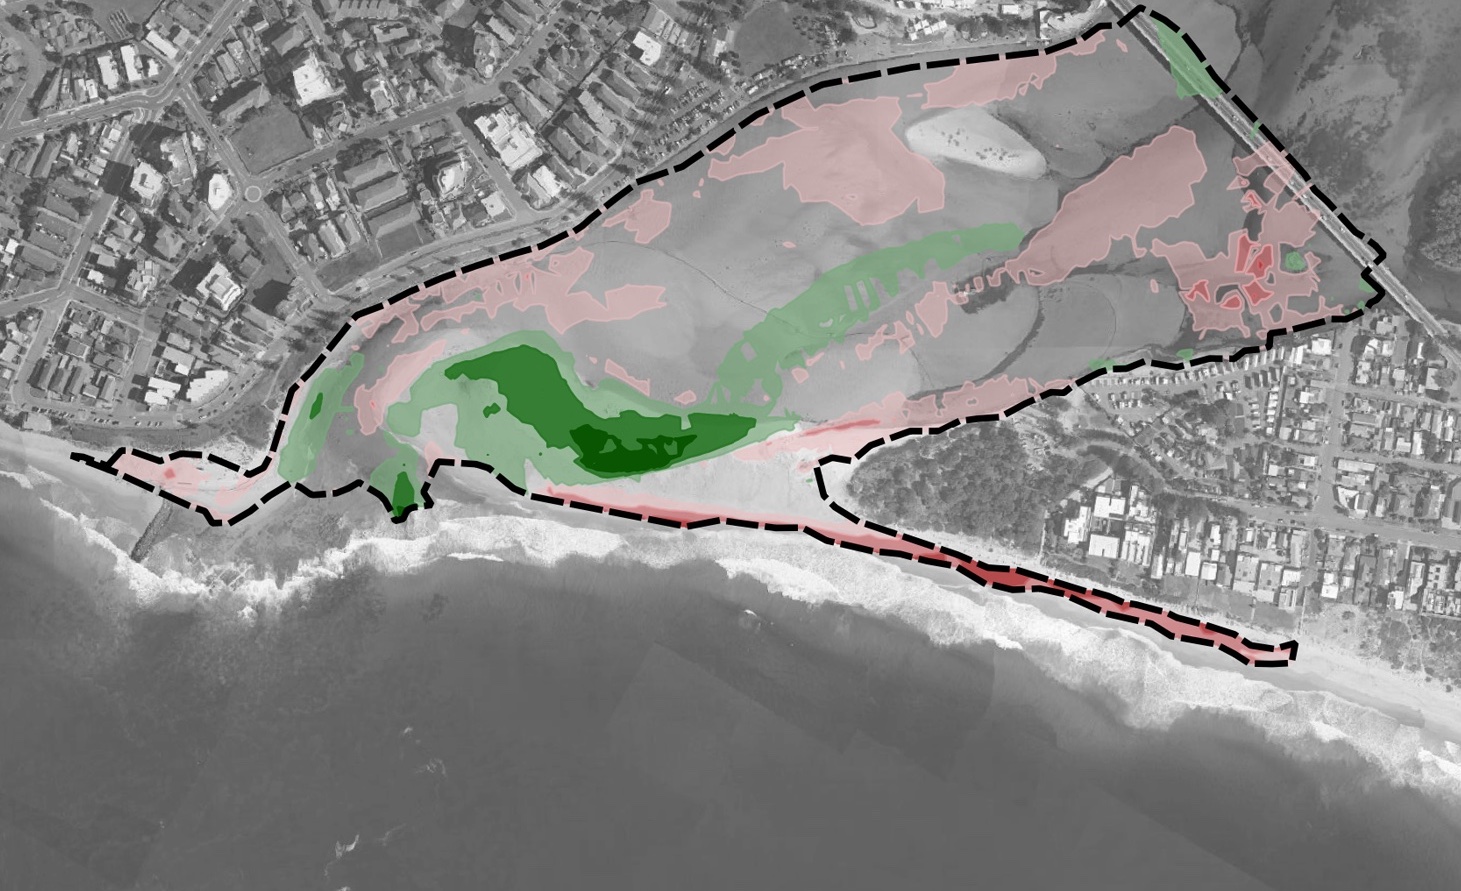 Map of a coastal entrance showing areas of erosion and siltation